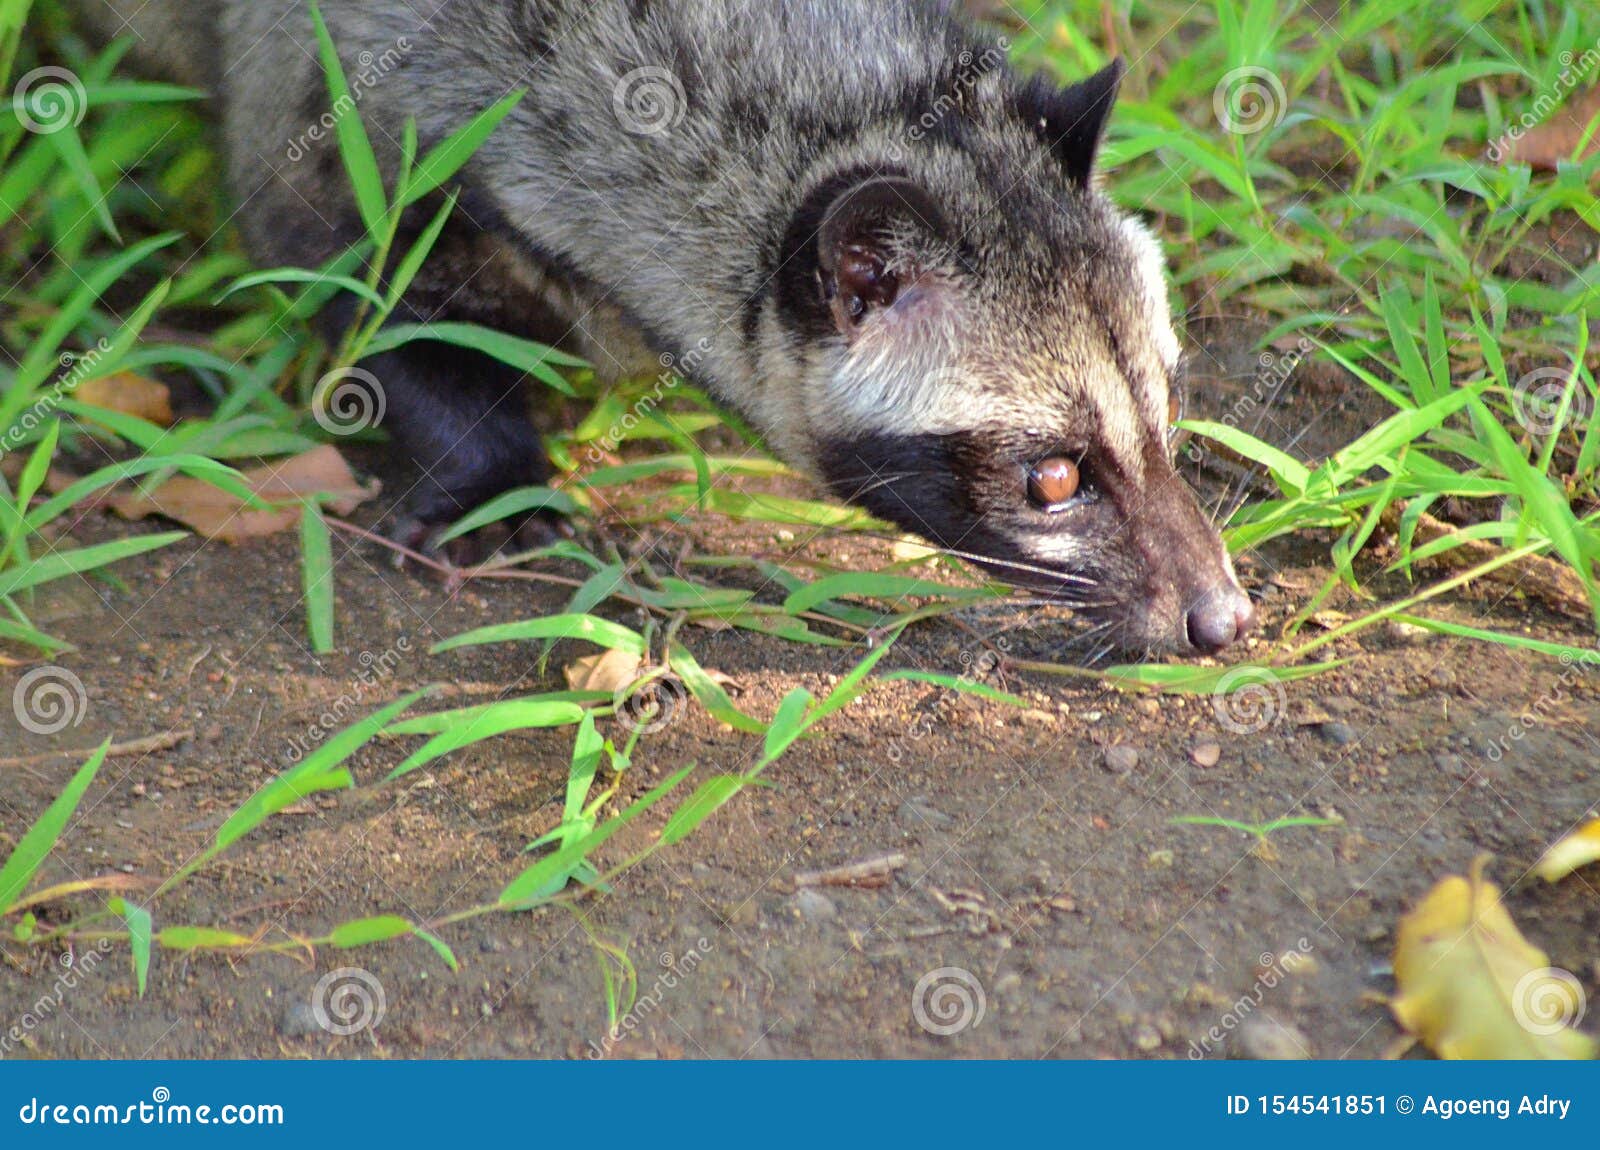 744 Asian Civet Photos Free Royalty Free Stock Photos From Dreamstime